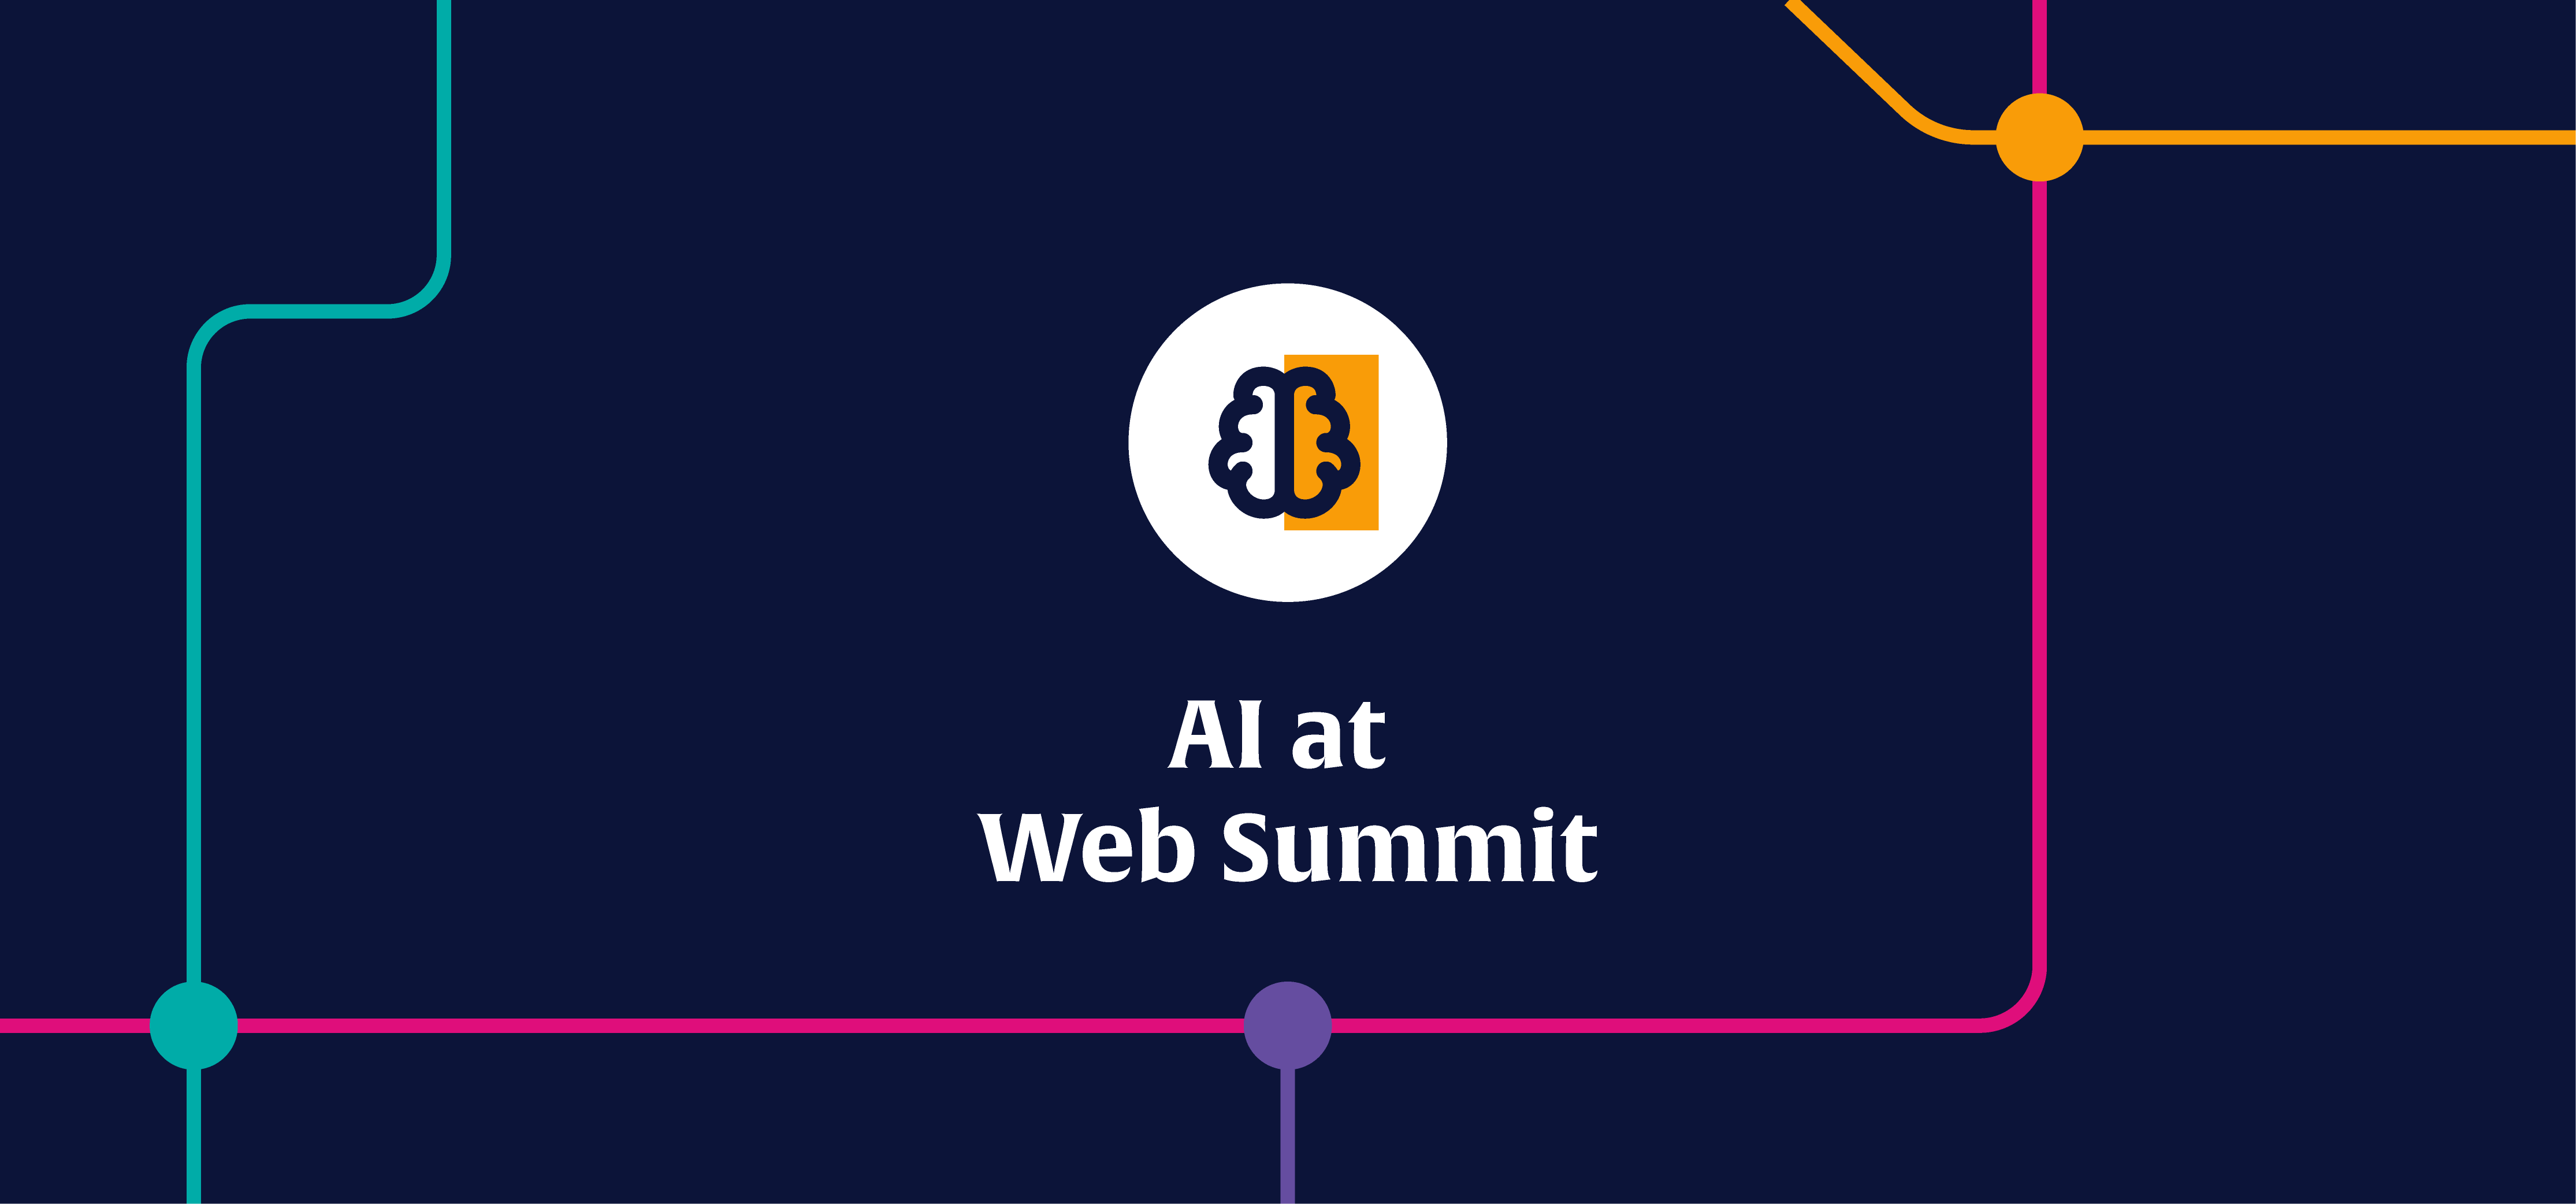 Text says 'AI at Web Summit'. There is also a logo of a brain